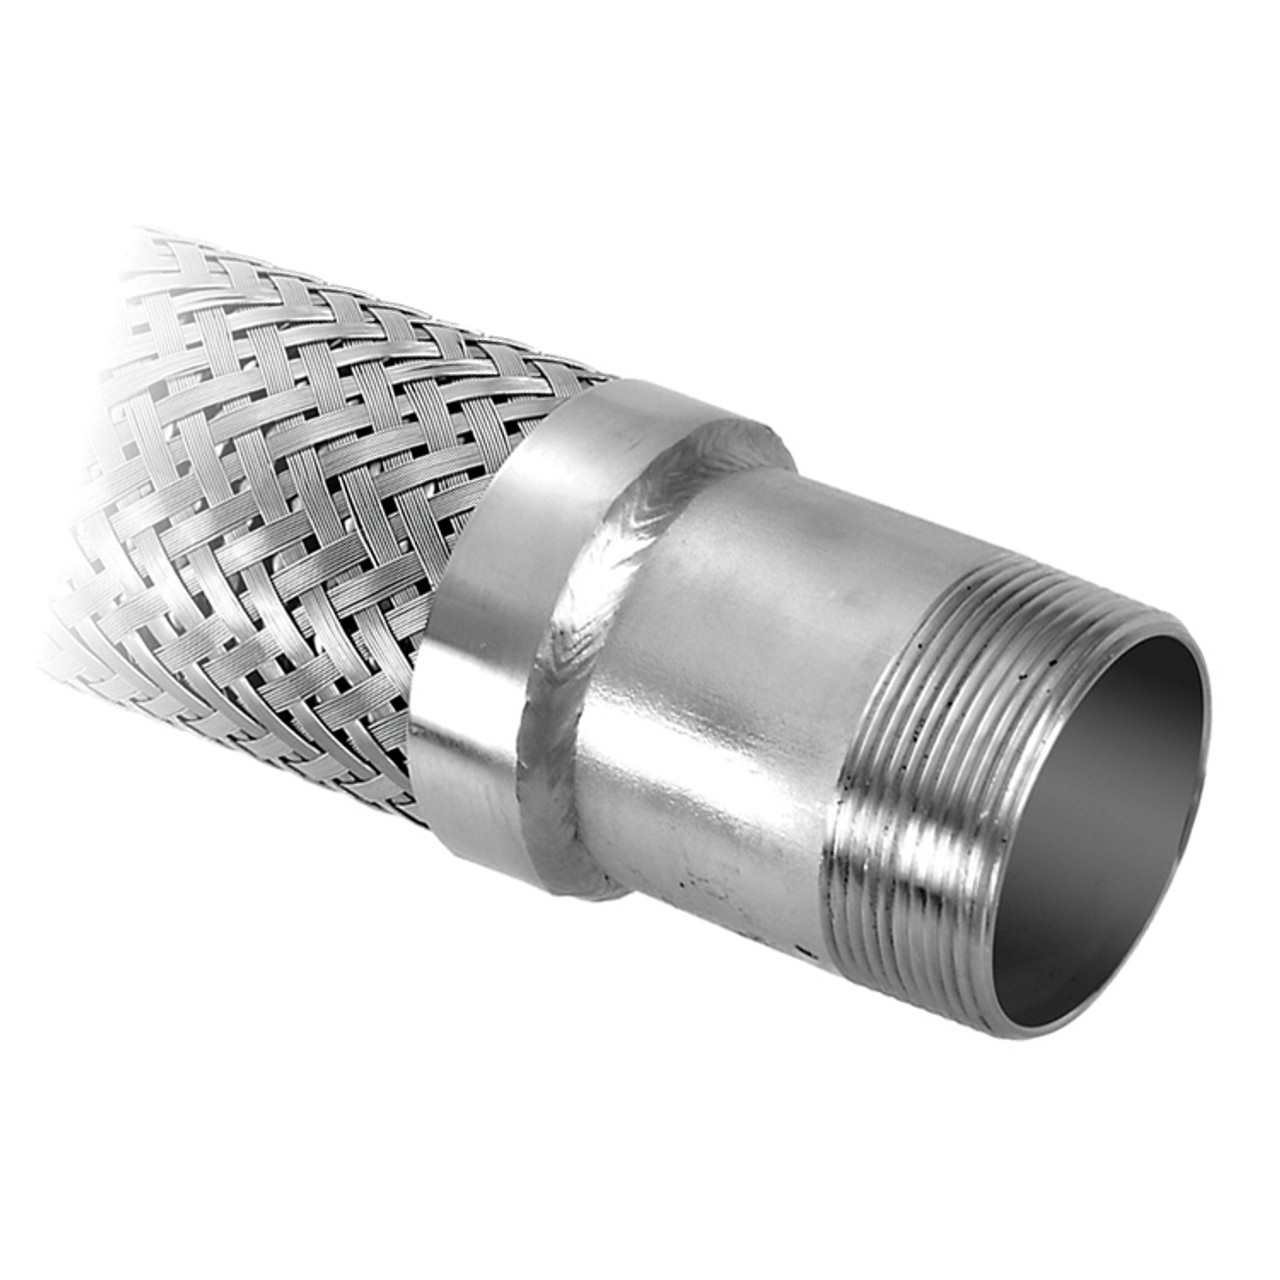 1-1/4 x 1-1/4" x 12" Stainless Steel Hose Assembly w/ 304SS Male Plain NPT Ends   G521-125MMSS-12